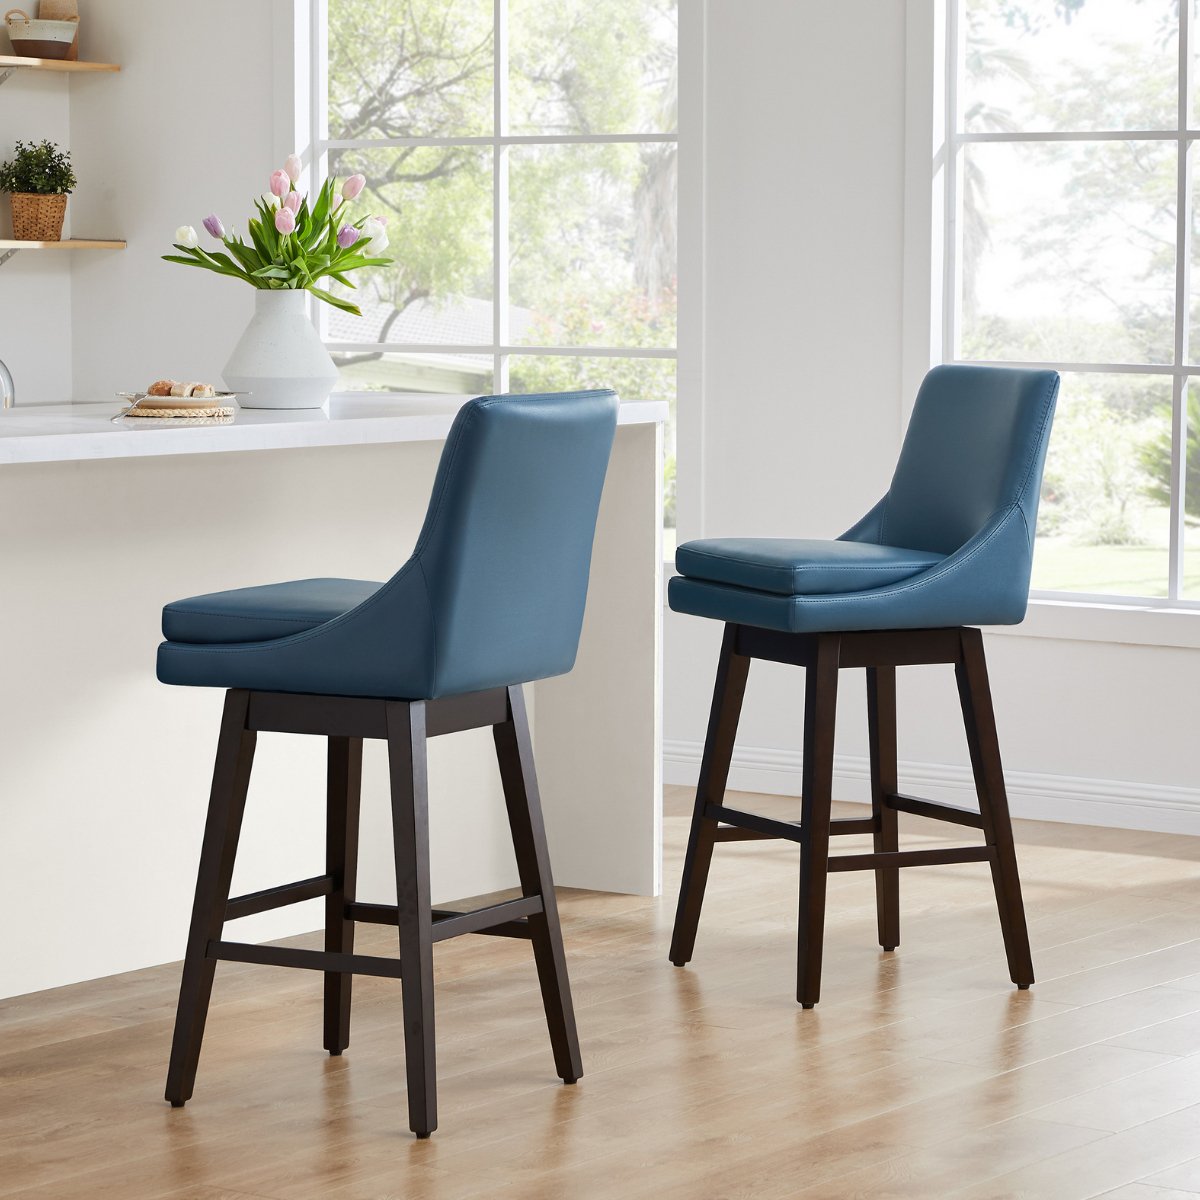 CHITA LIVING-Lissa Swivel Counter Stool 26.8'' ( Set of 2)-Counter Stools-Faux Leather-Light Gray-